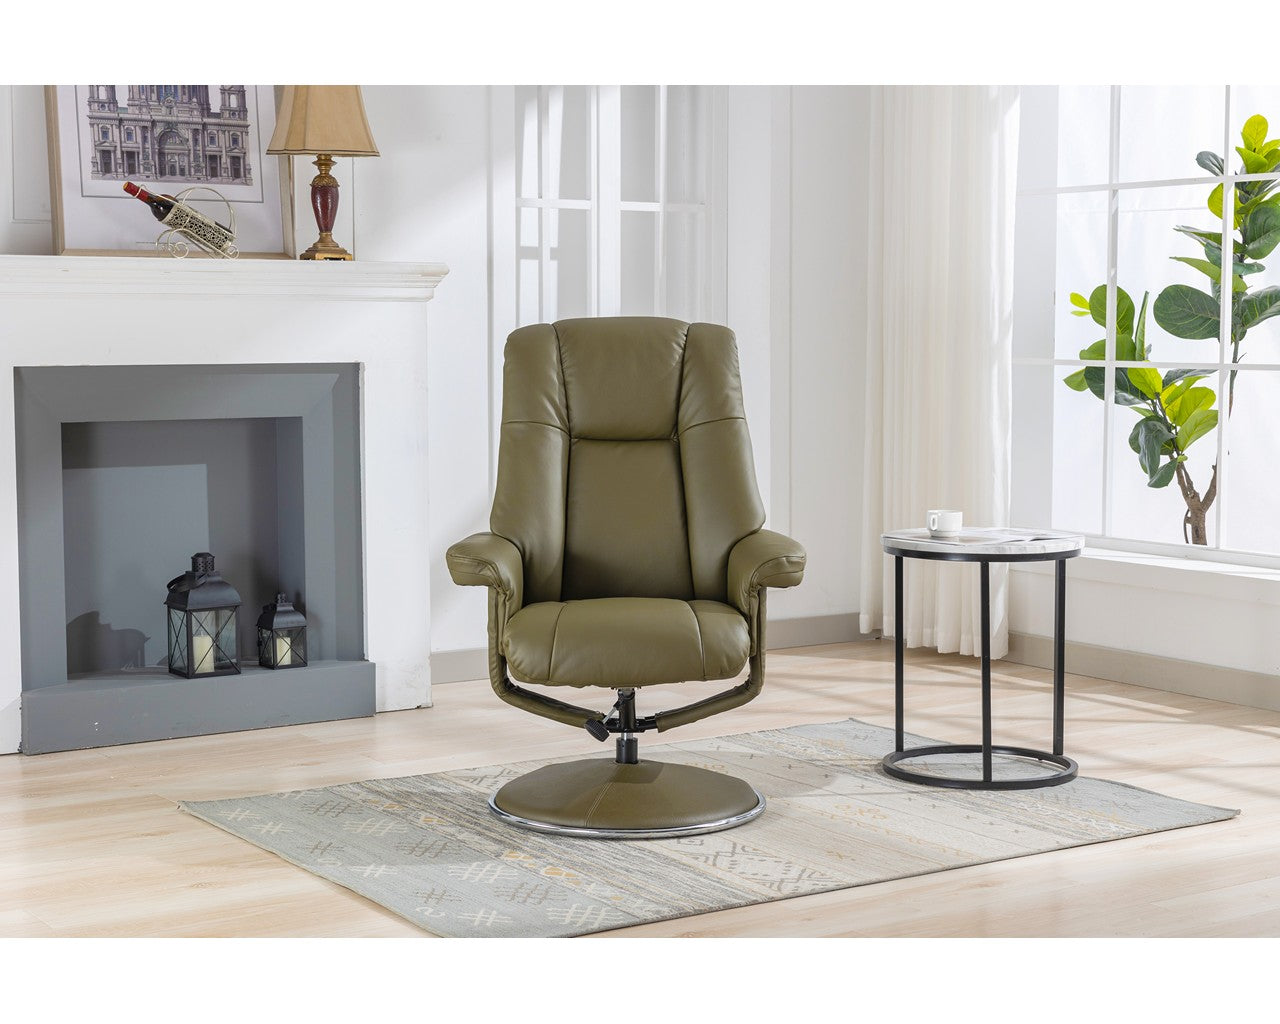 Swivel Recliner Chair Collection - Denver: Olive Green Leather